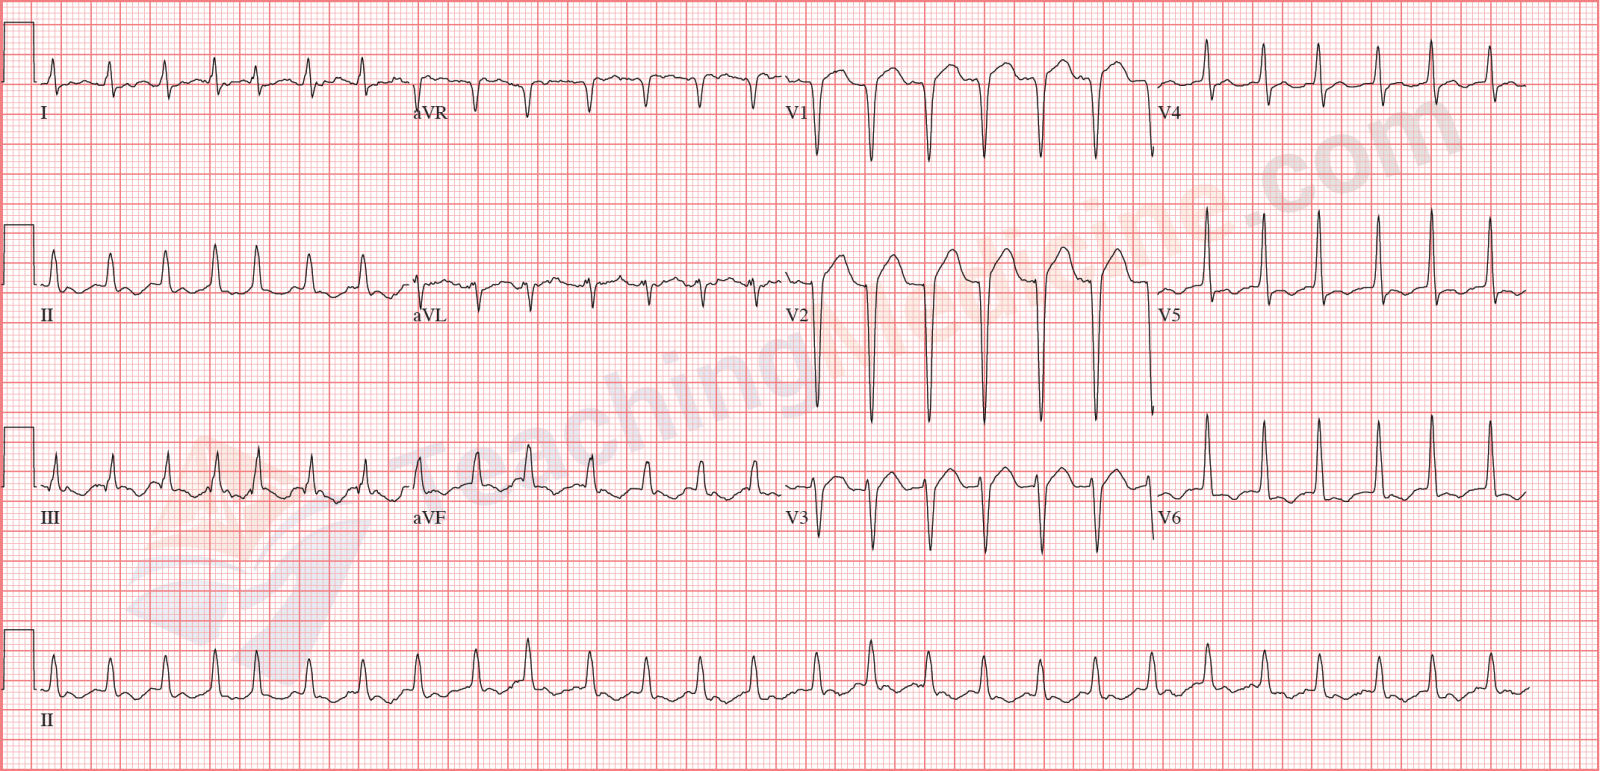 The QRS is wide in this example of atrial fibrillation